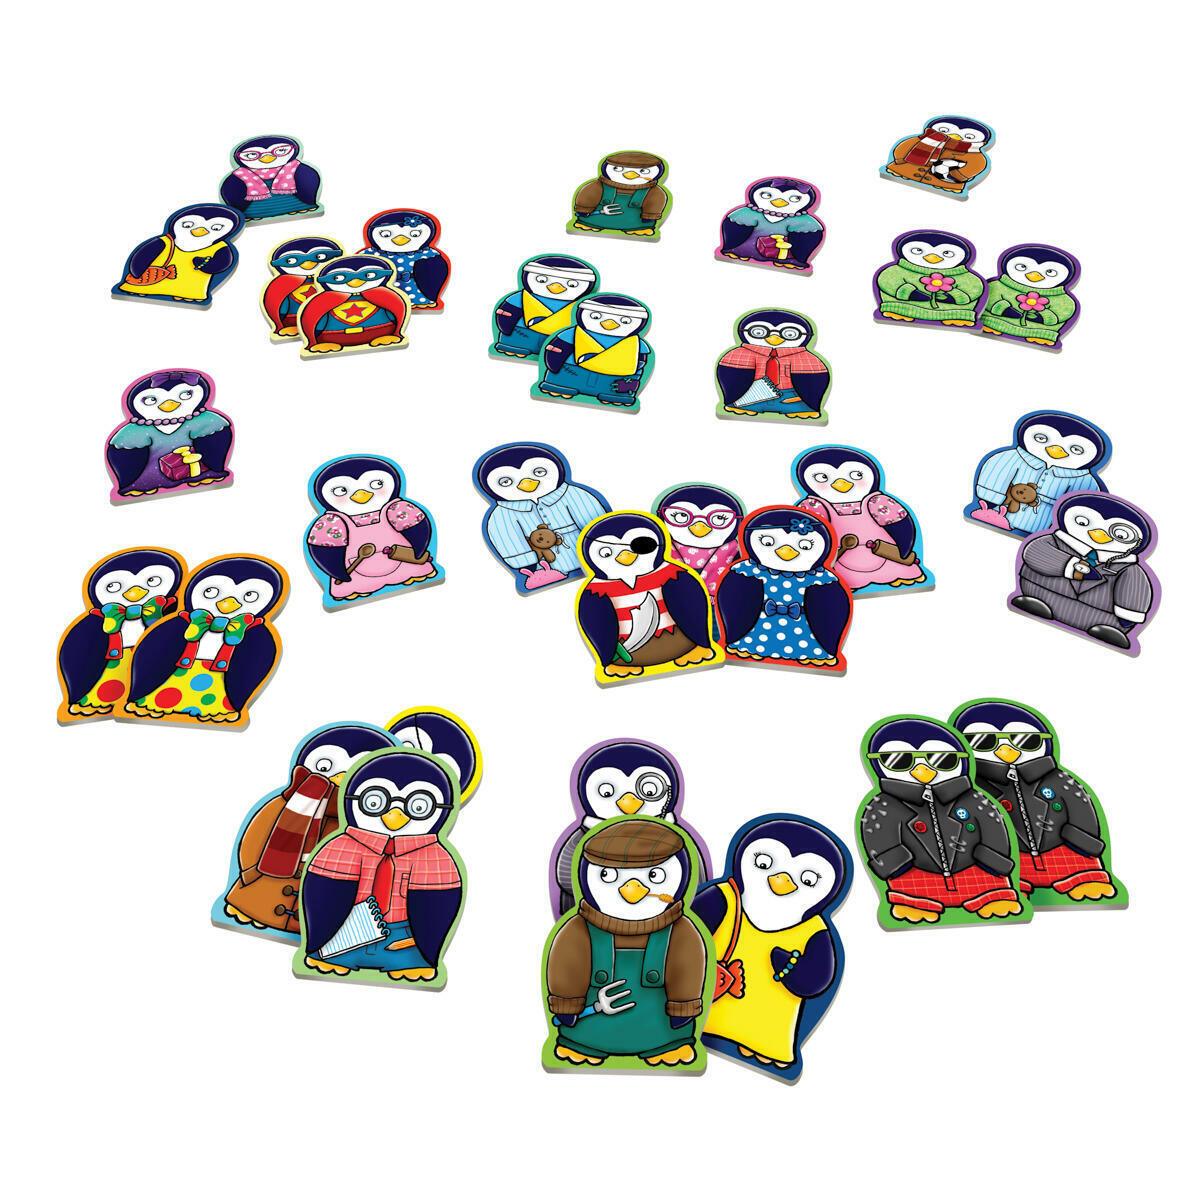 Penguin Pairs Mini Game Kids Fun Matching Travel Activity - Home Inspired Gifts